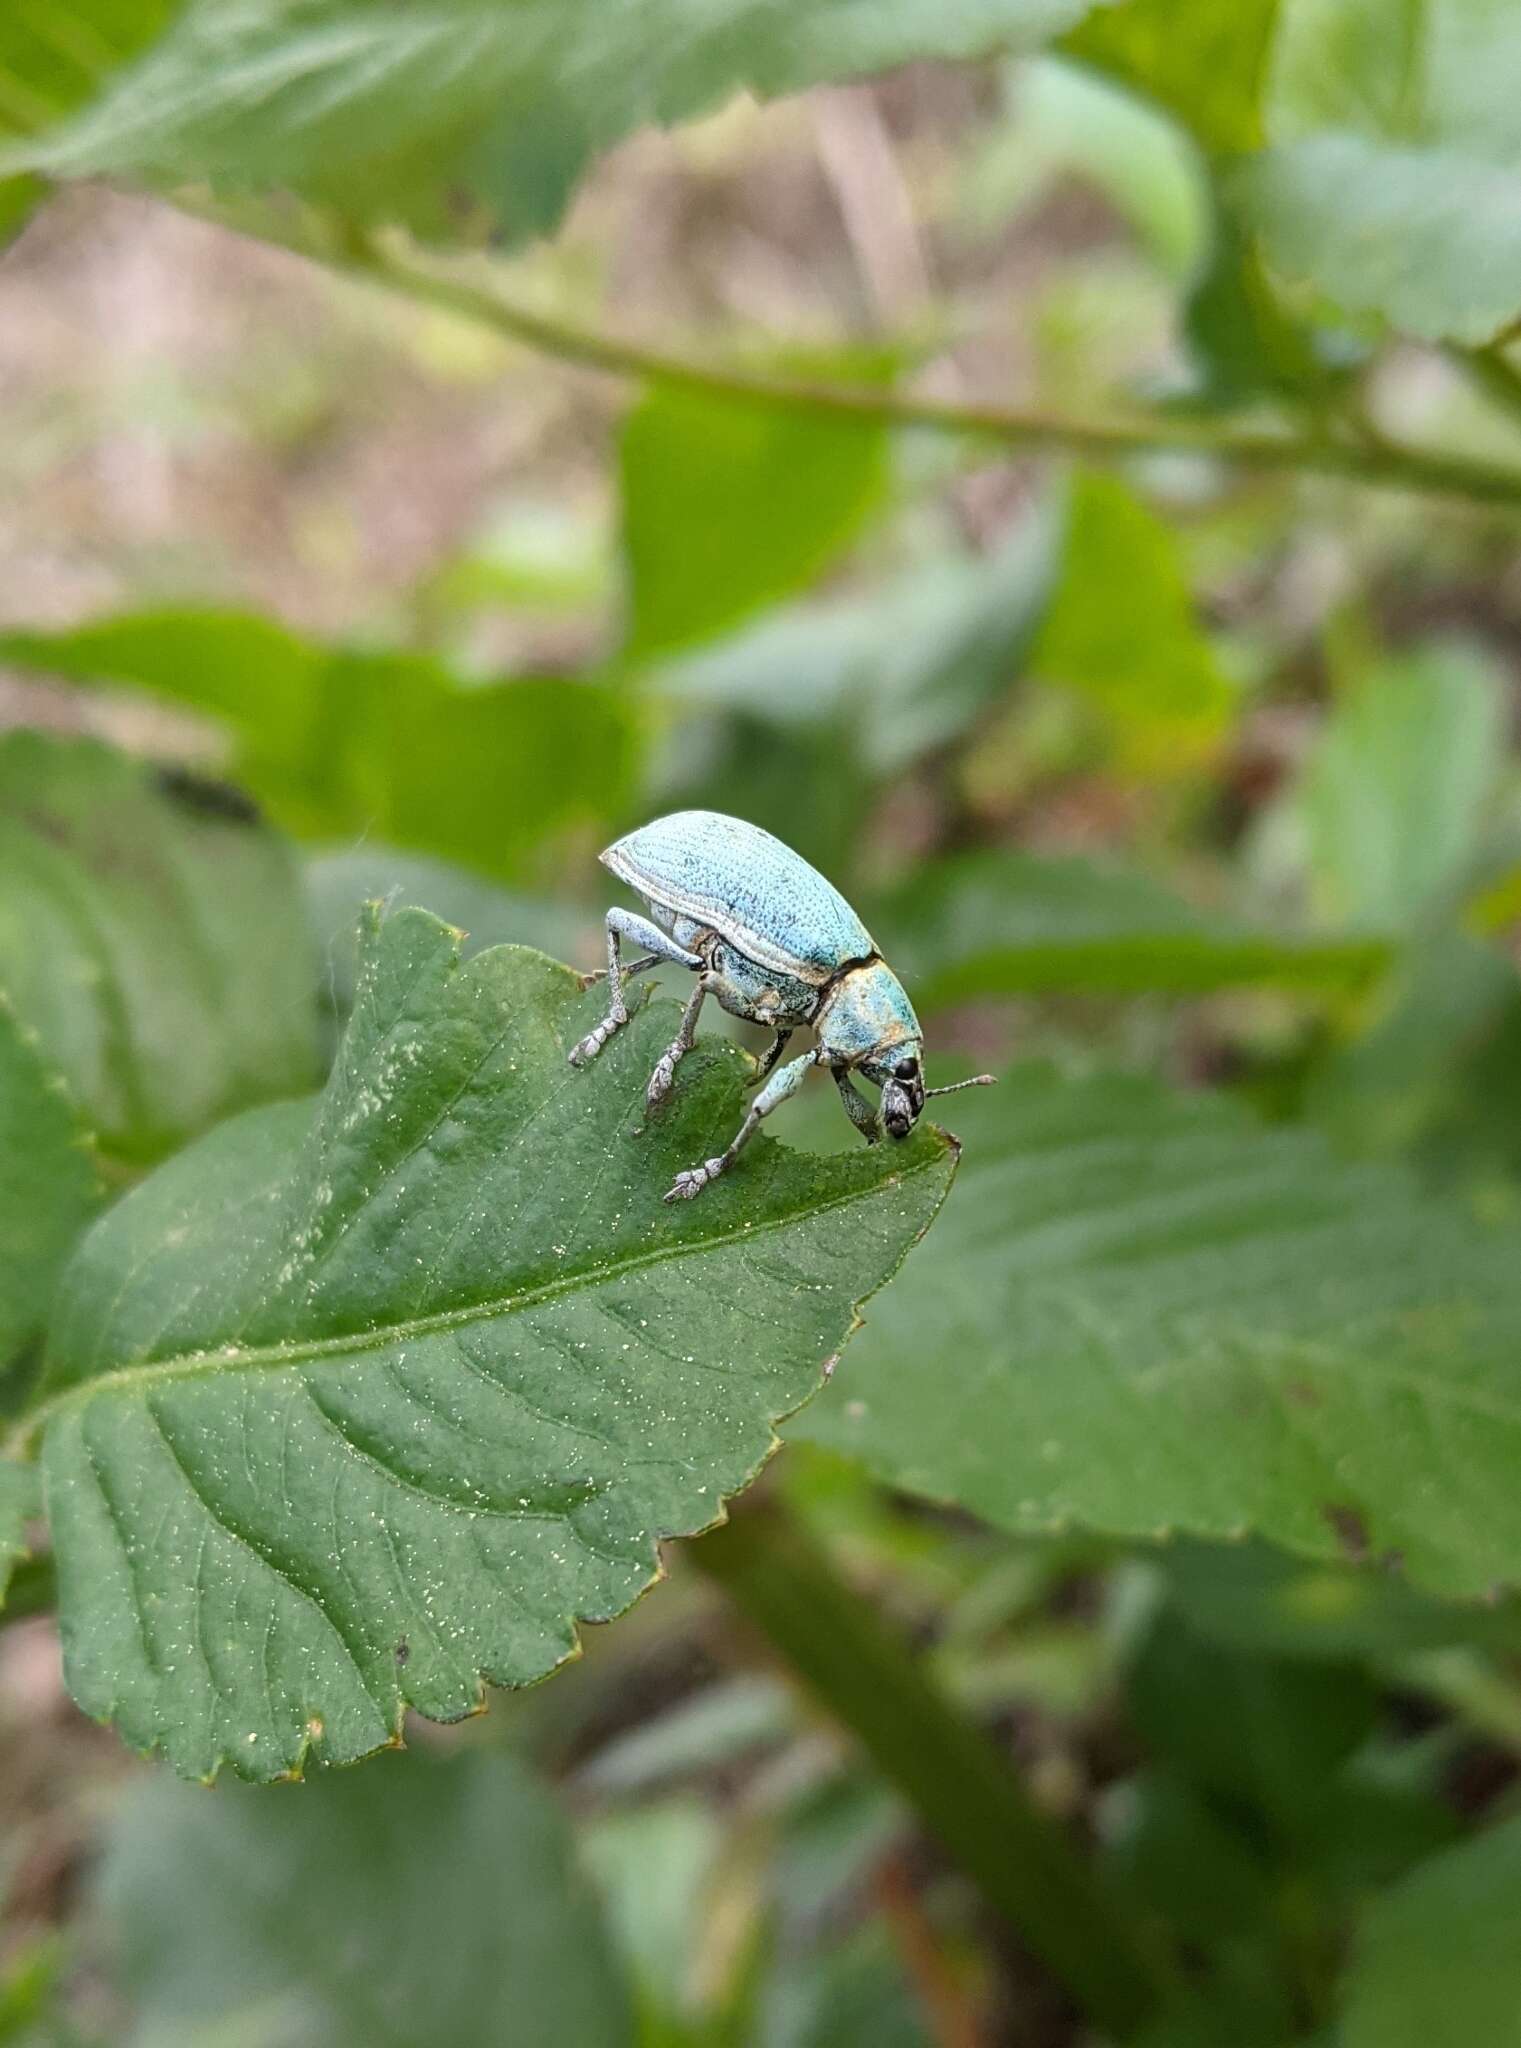 Image of Blue-green citrus weevil